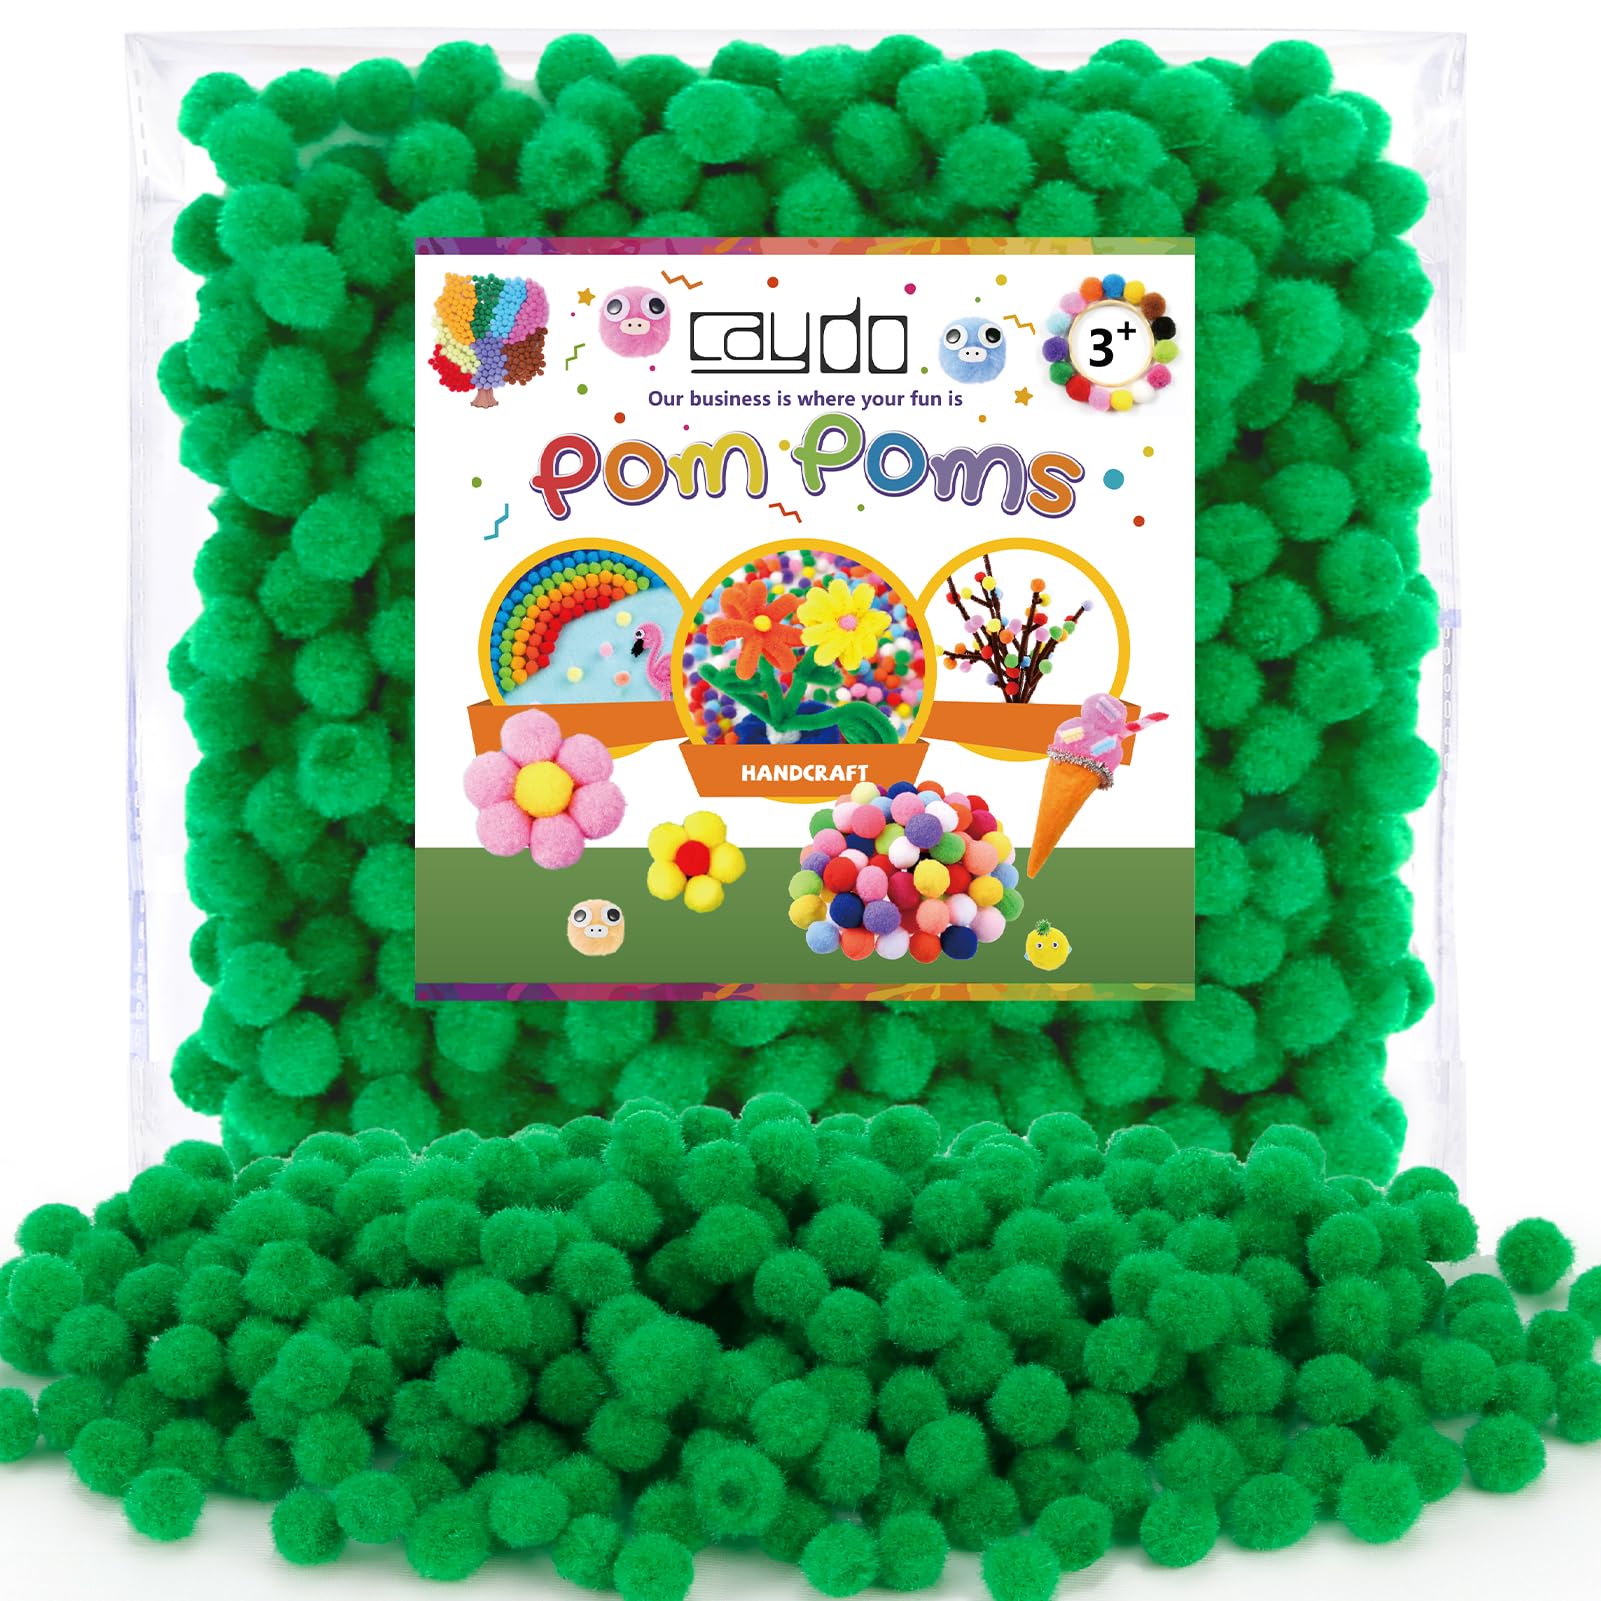 Wau Crafts 2000 Pieces - 1 cm Mini Pom Pom Balls, Assorted Colored Pompoms for Crafts, Multicolored Pom Poms Arts and Crafts and DIY in Resealable Bag